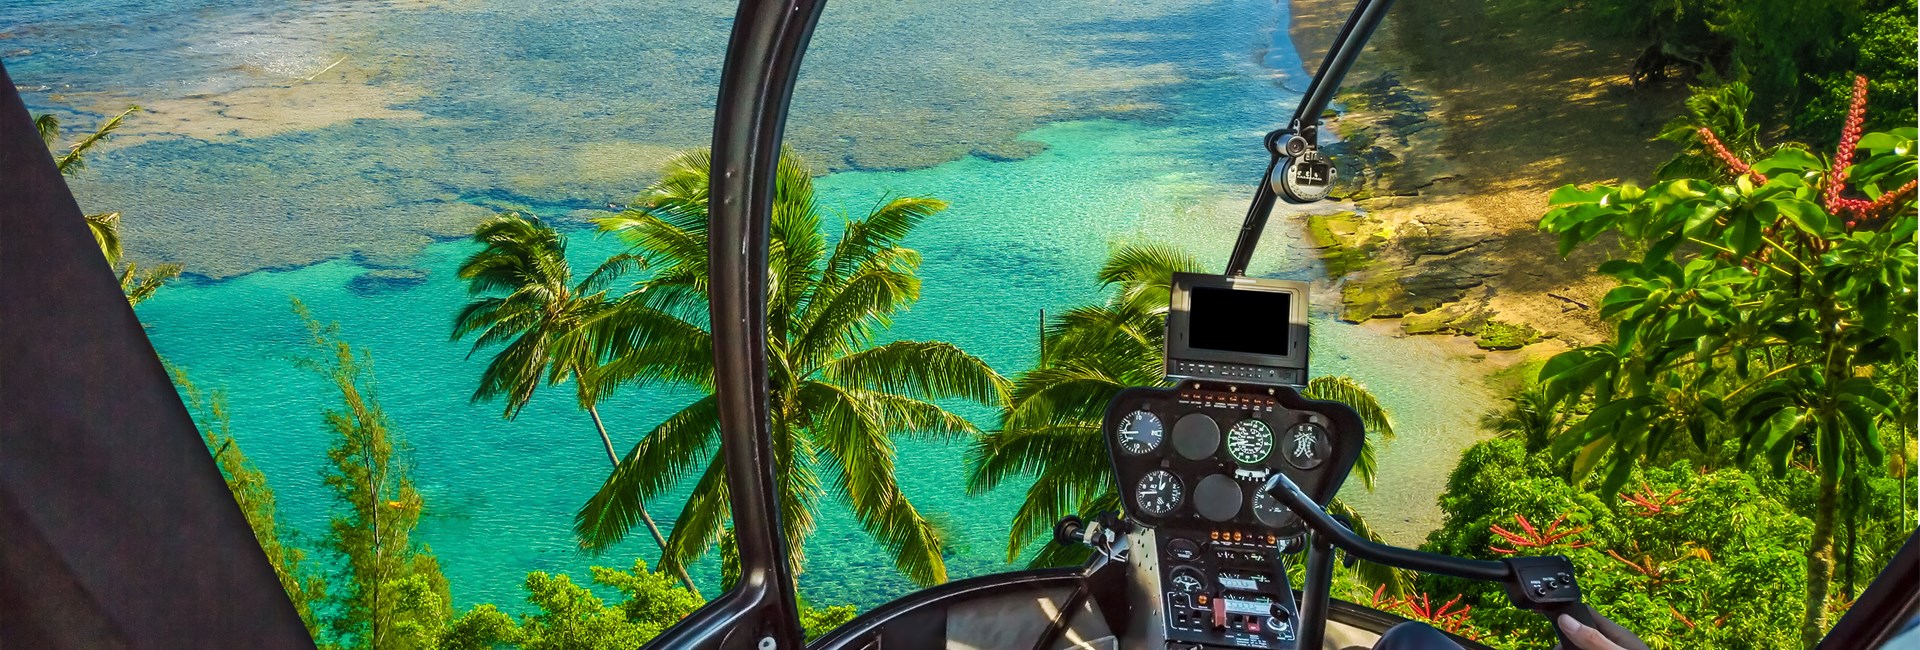 tropical paradise of palms, beach and ocean from helicopter window